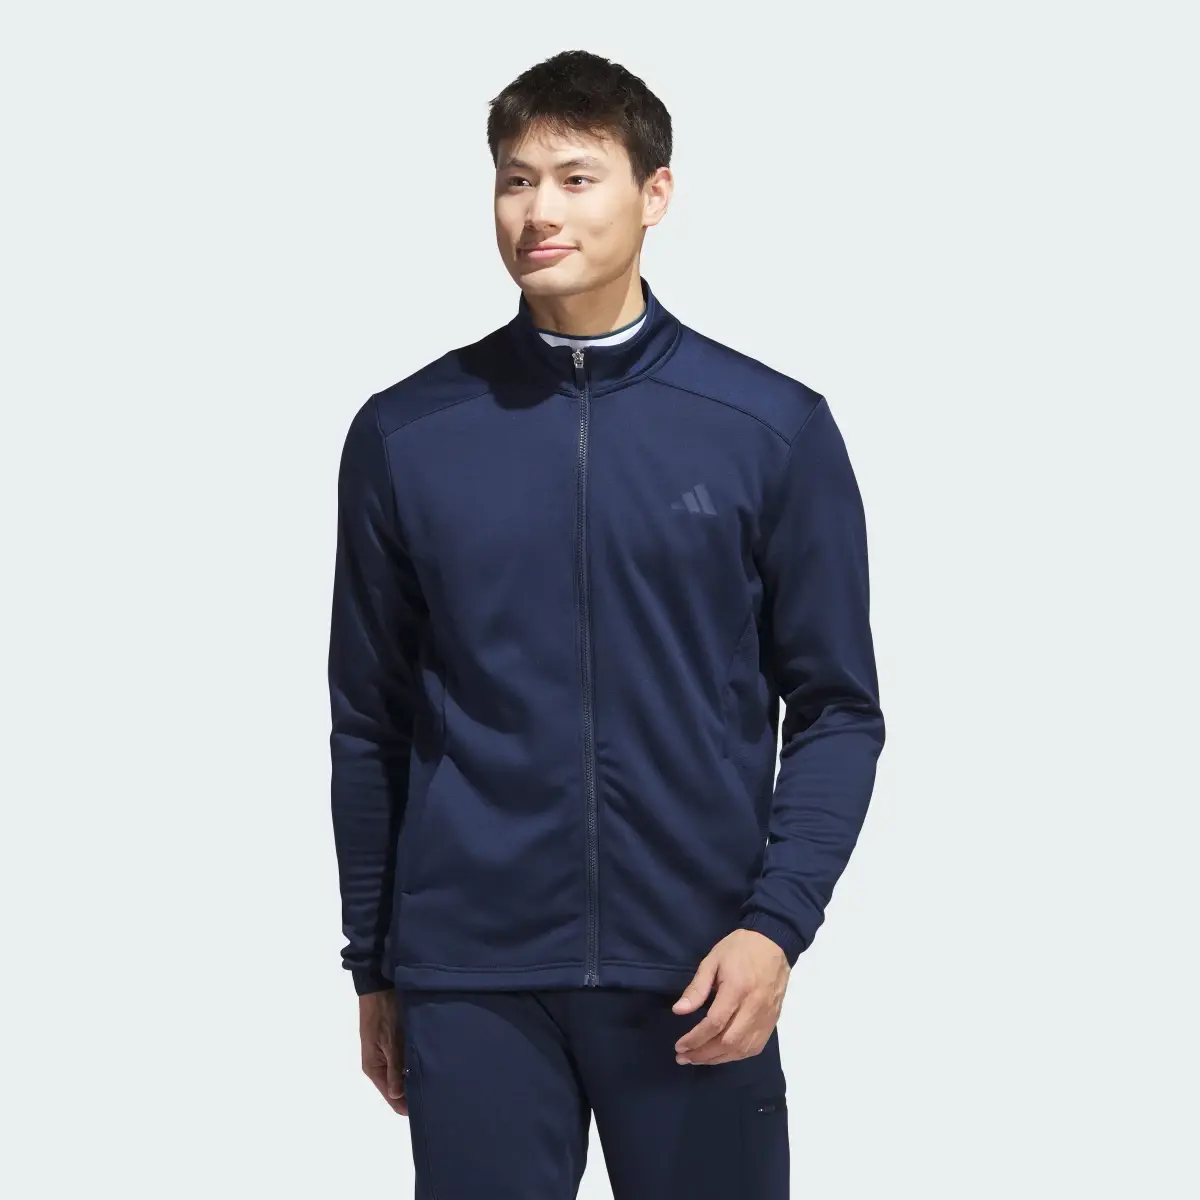 Adidas COLD.RDY Full-Zip Jacket. 2